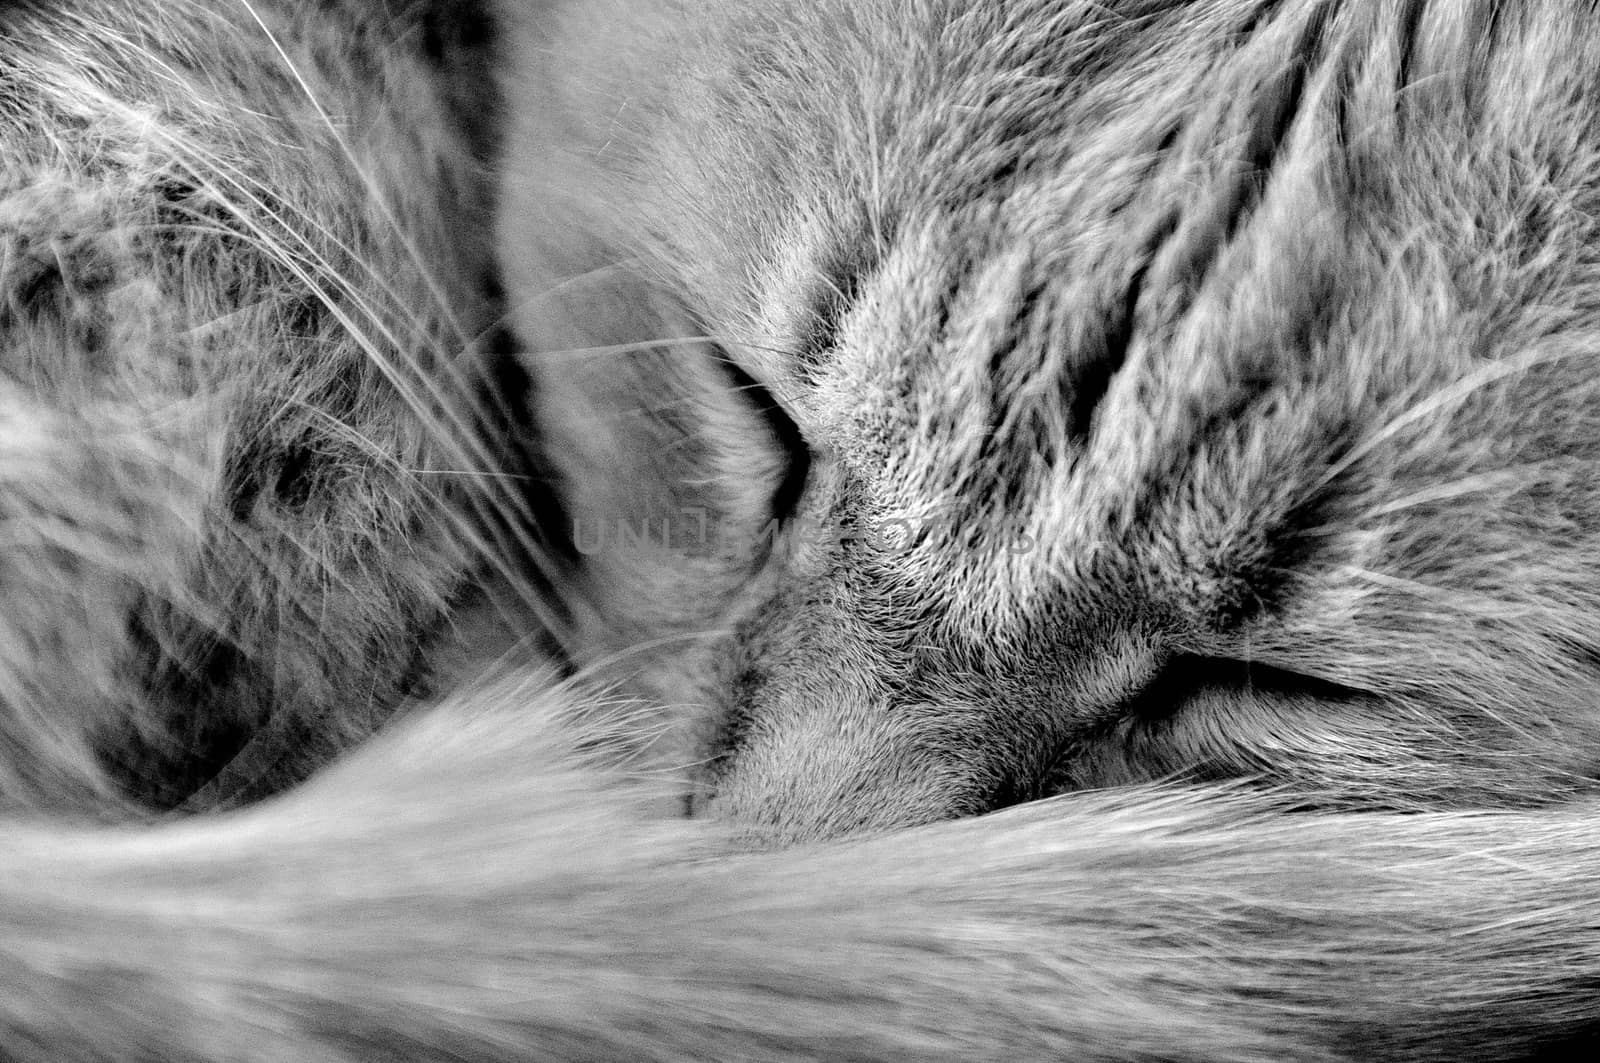 Sleeping cat by anderm